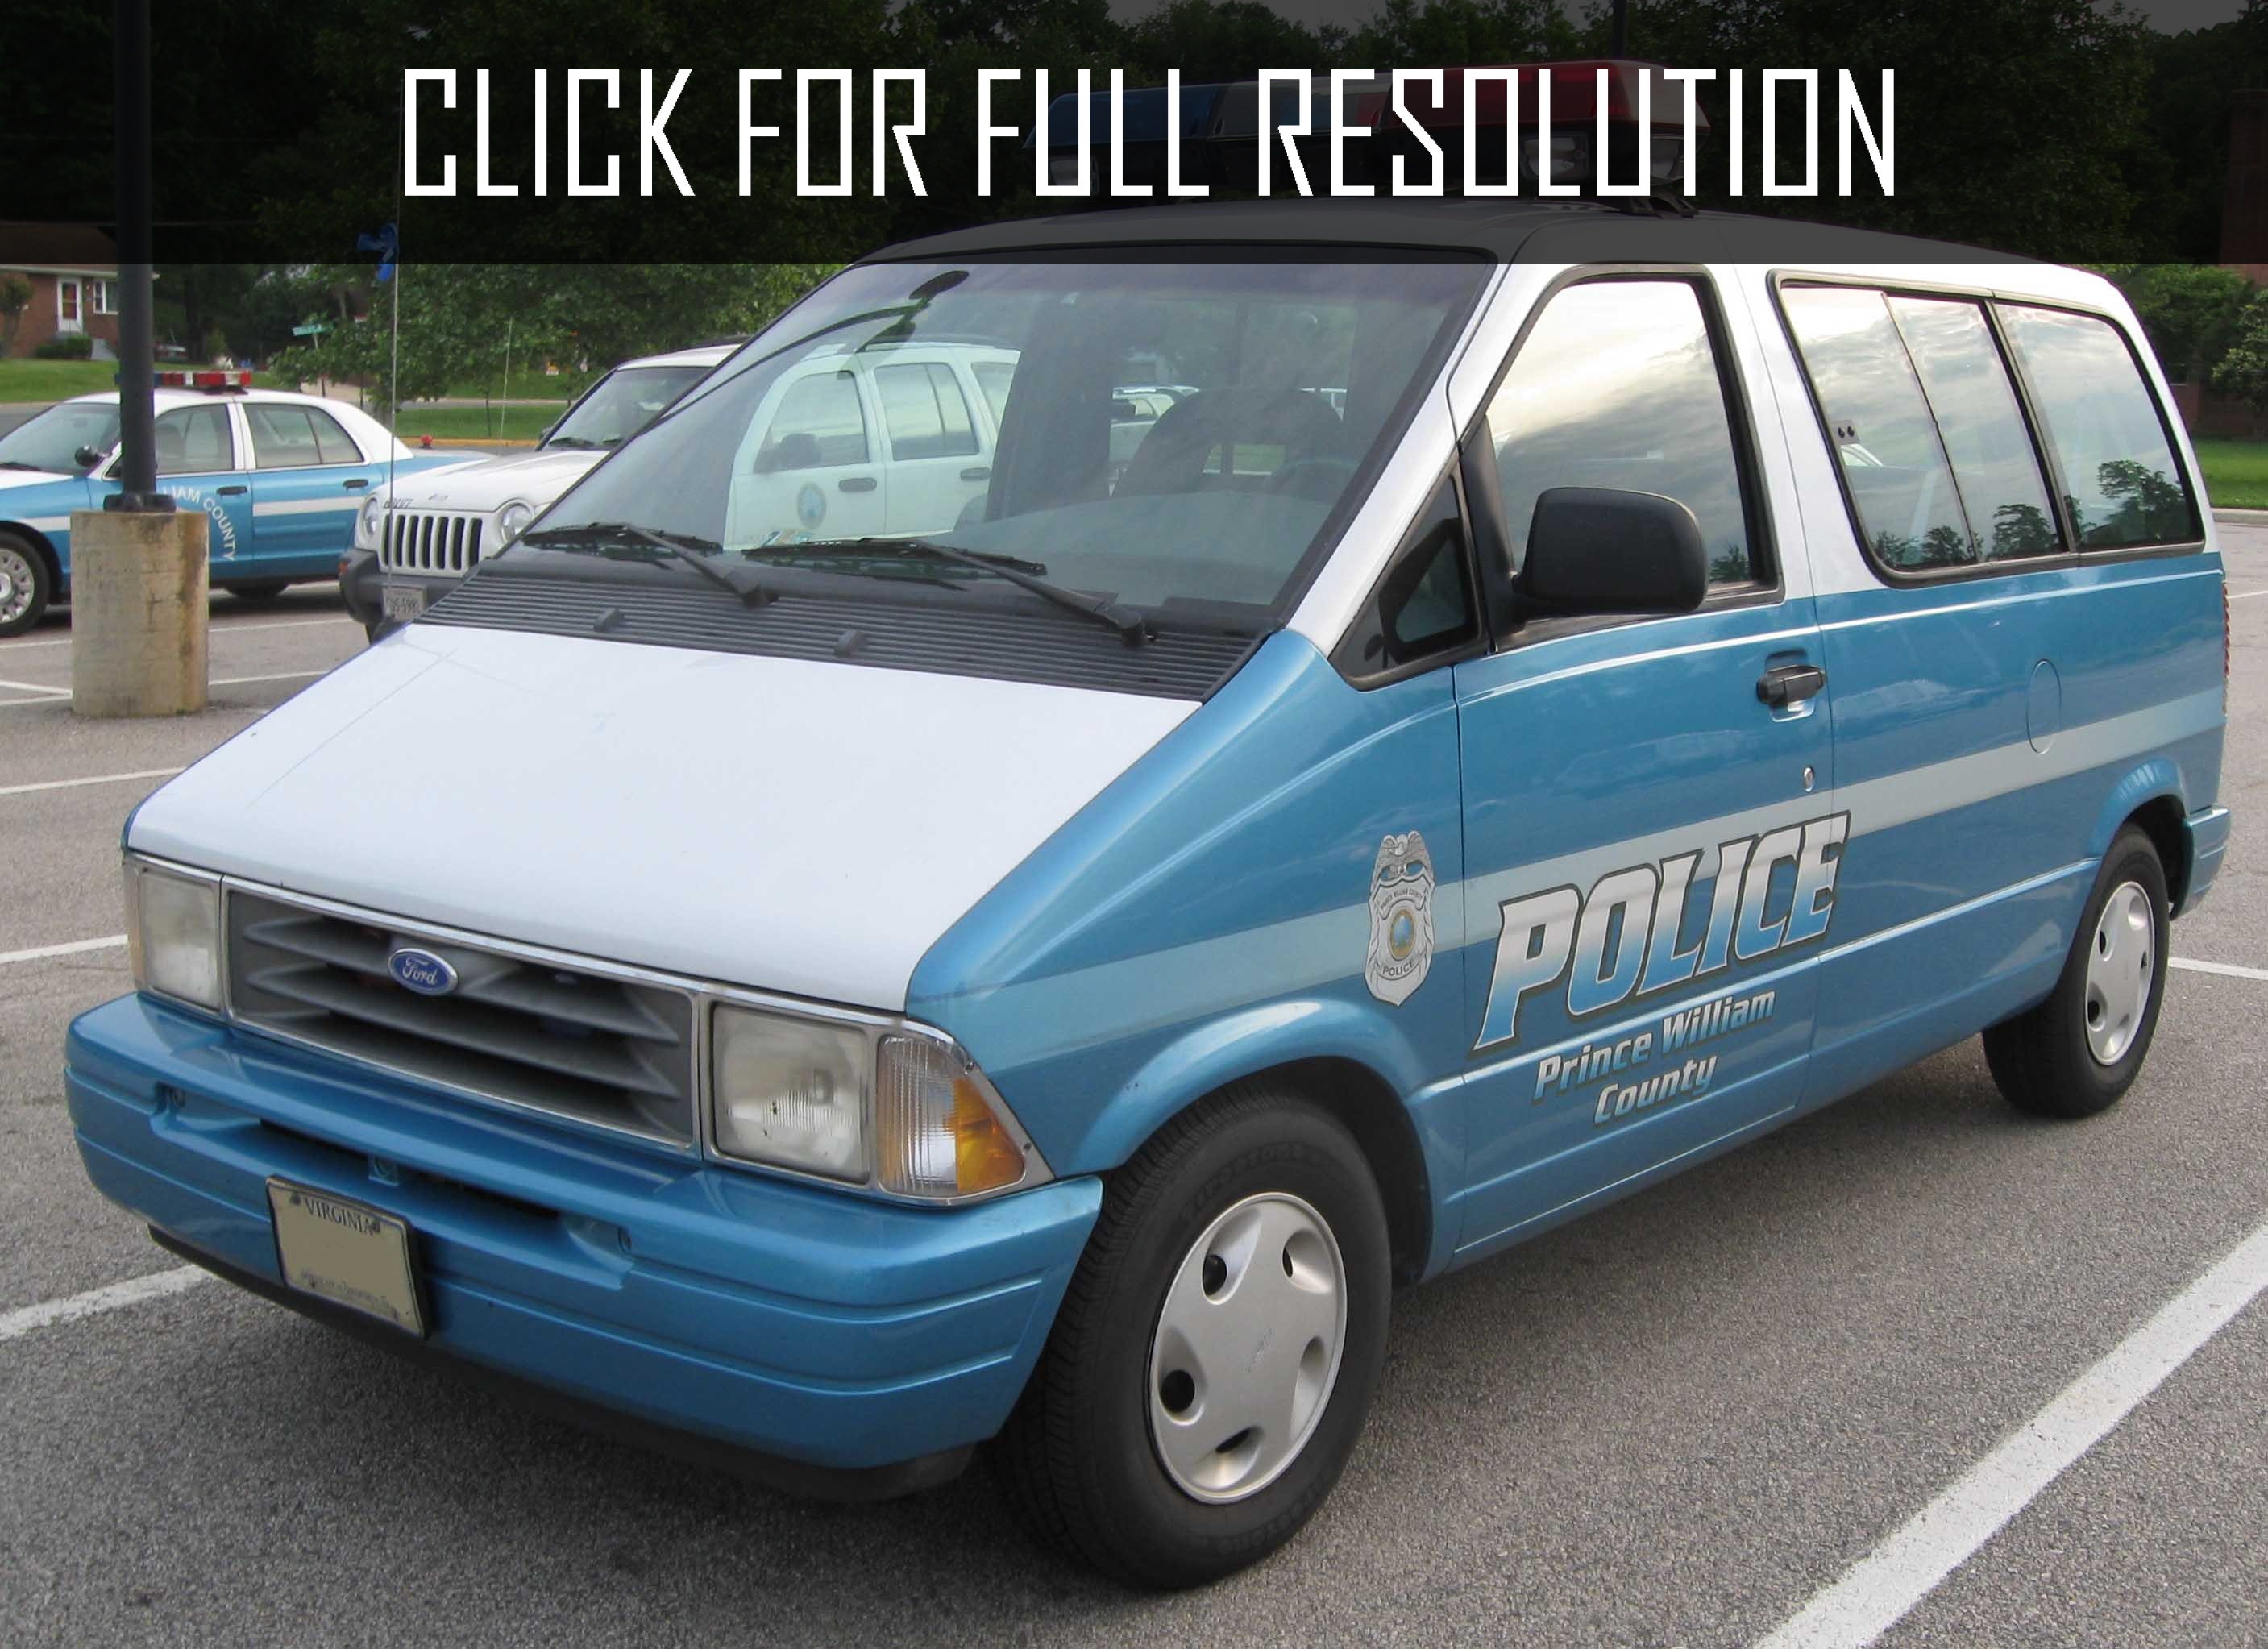 1992 Ford Windstar